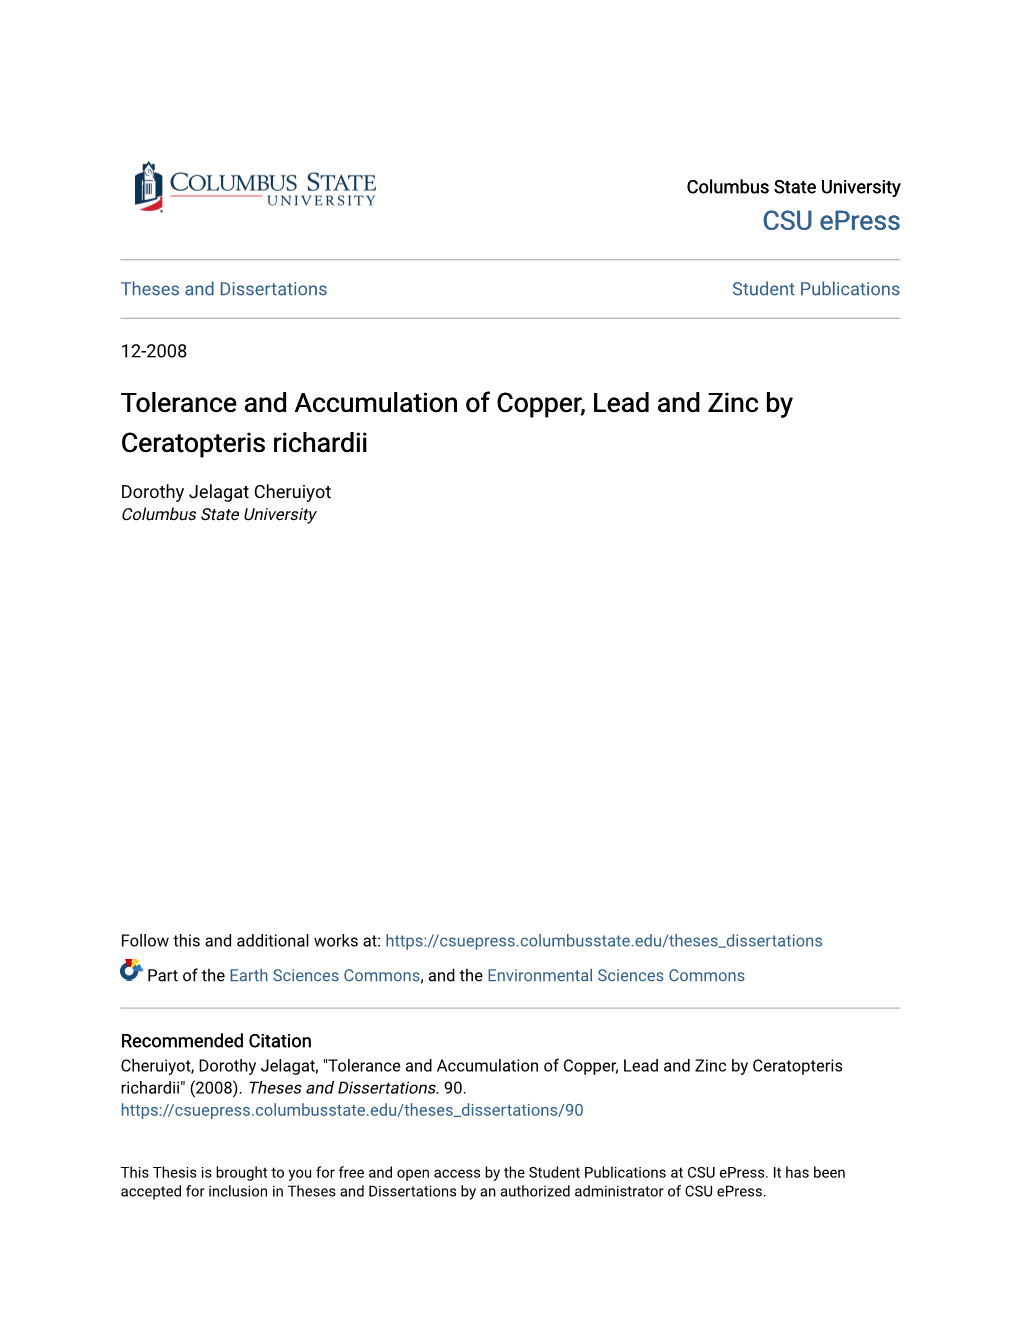 Tolerance and Accumulation of Copper, Lead and Zinc by Ceratopteris Richardii